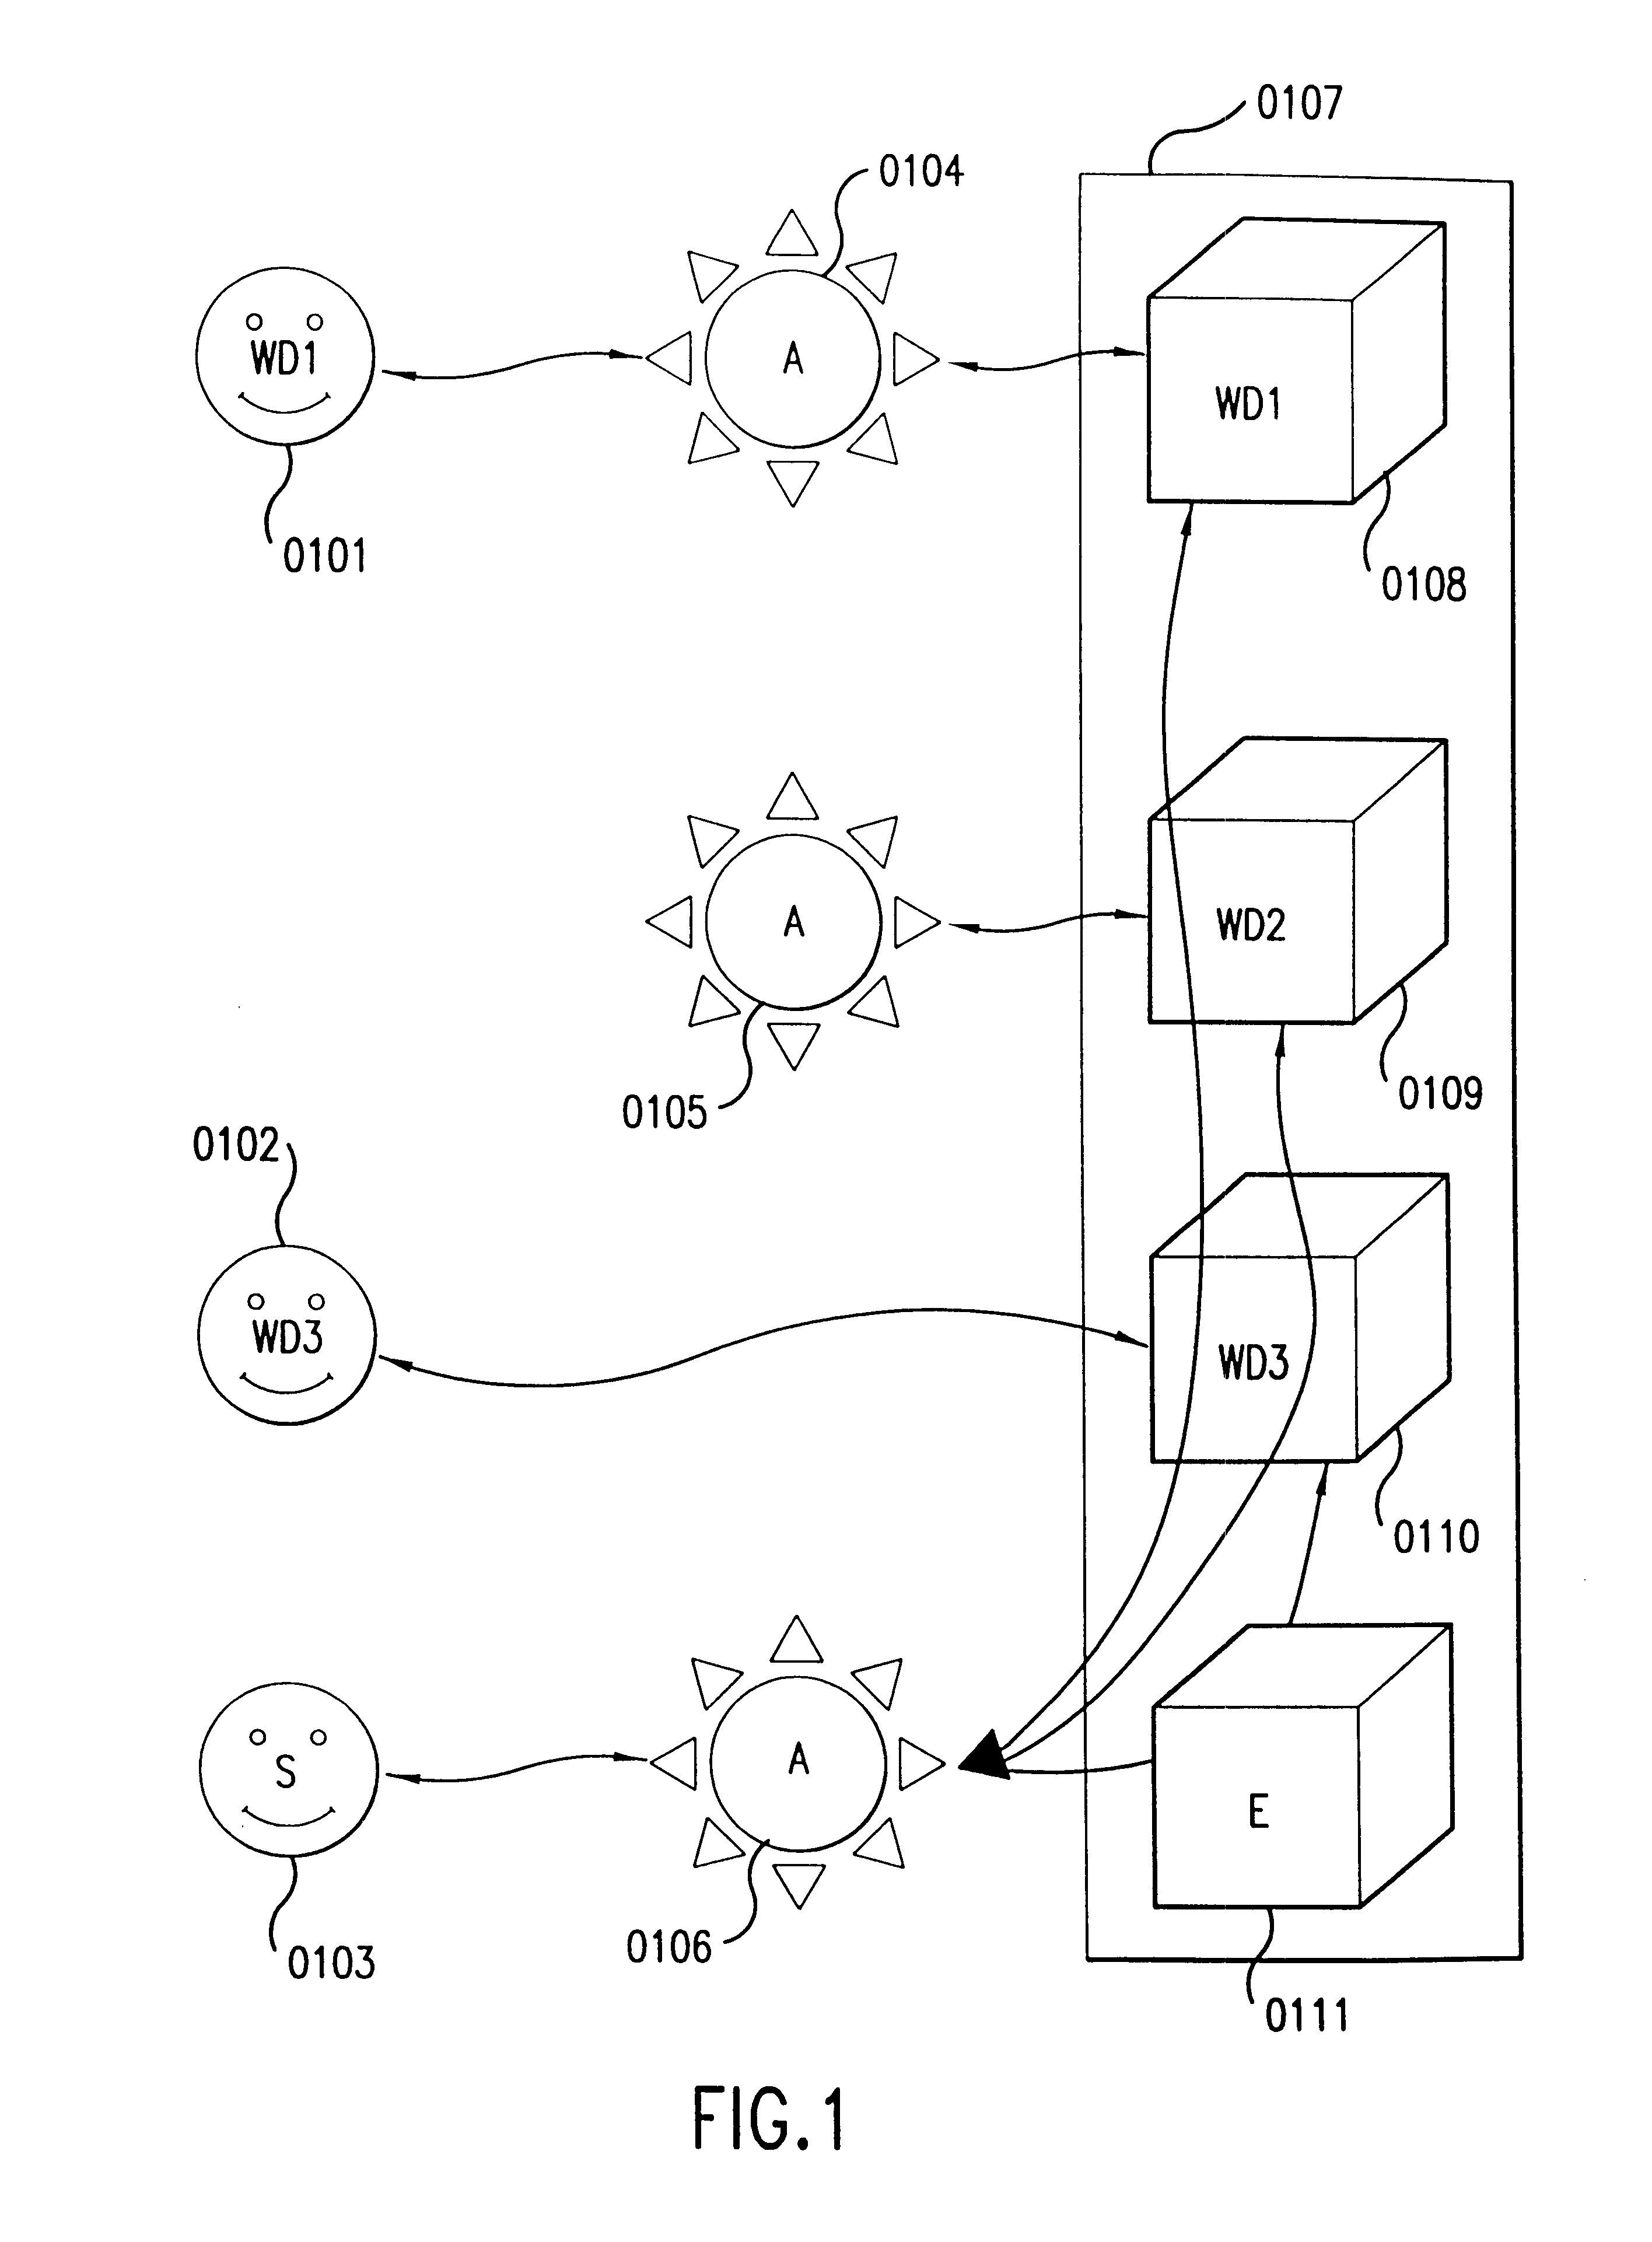 Method and system for intelligent agent decision making for tactical aerial warfare